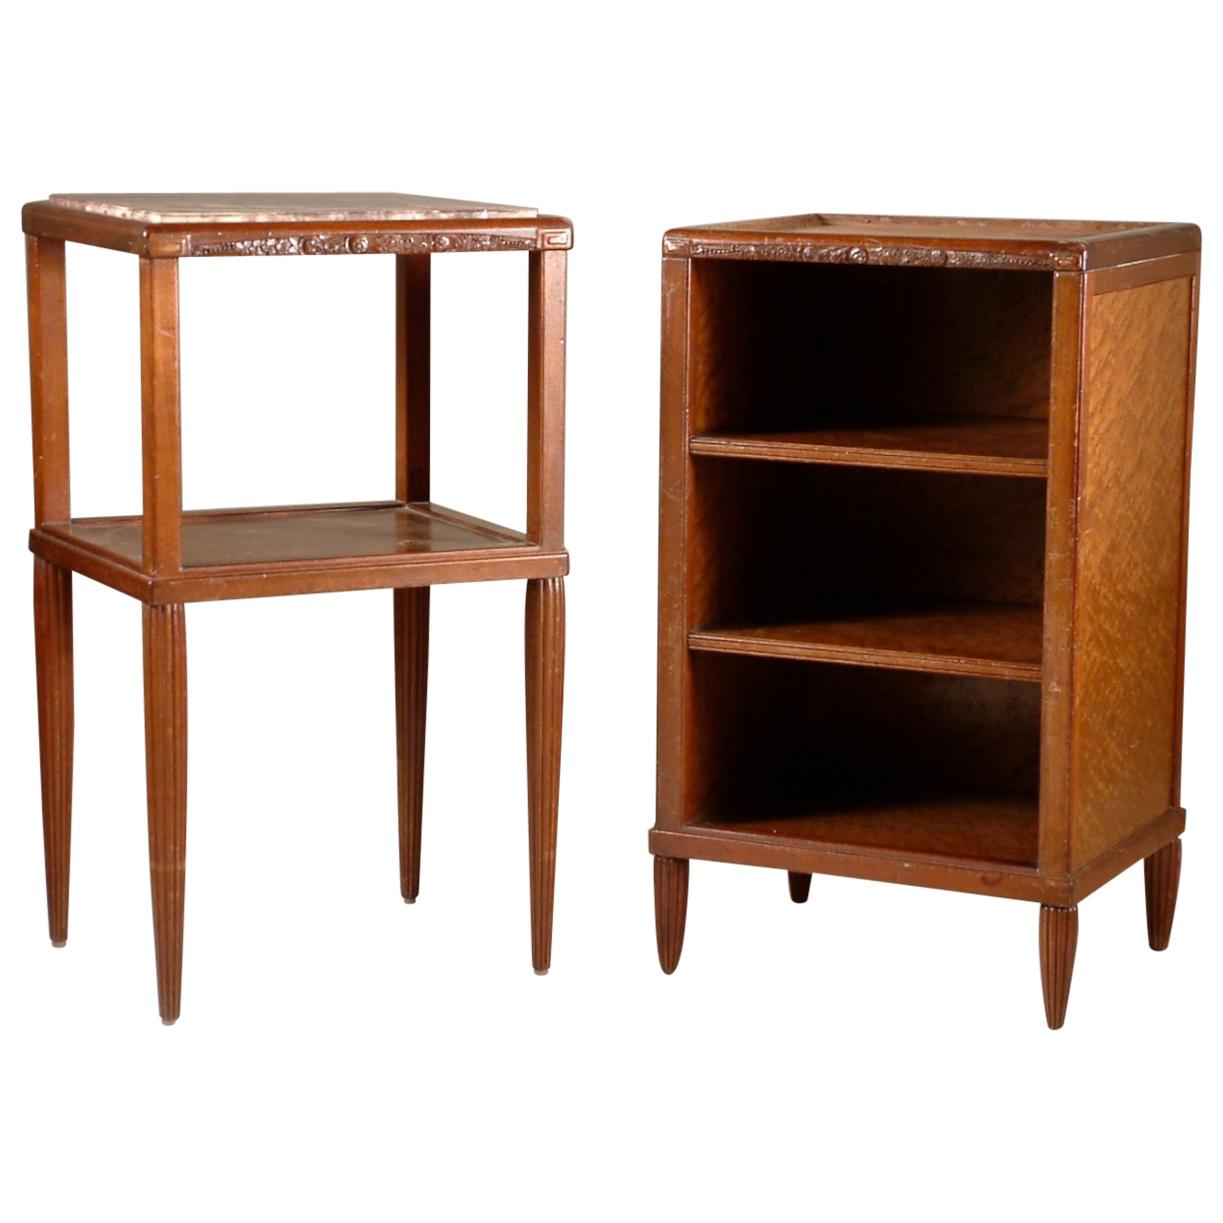 Maurice Dufrene Pair of Side Tables or Nightstands